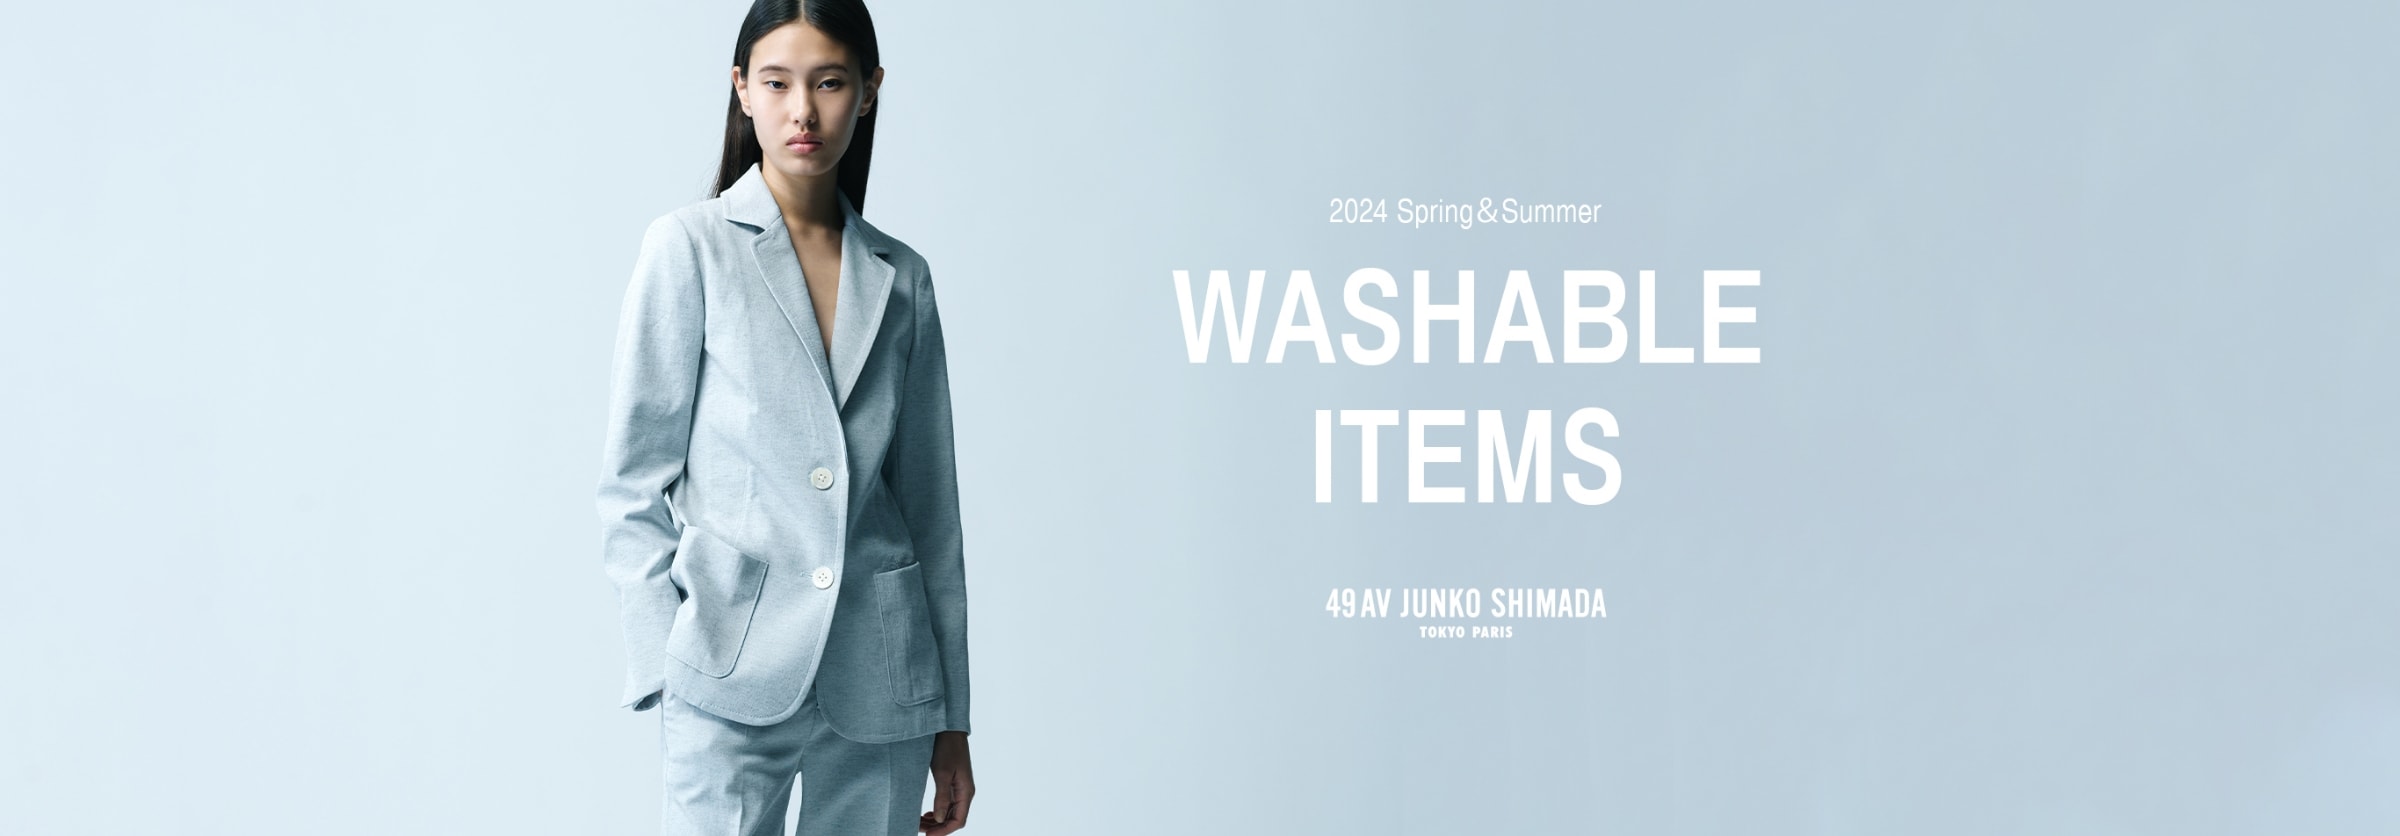 2024 Spring&Summer WASHABLE ITEMS